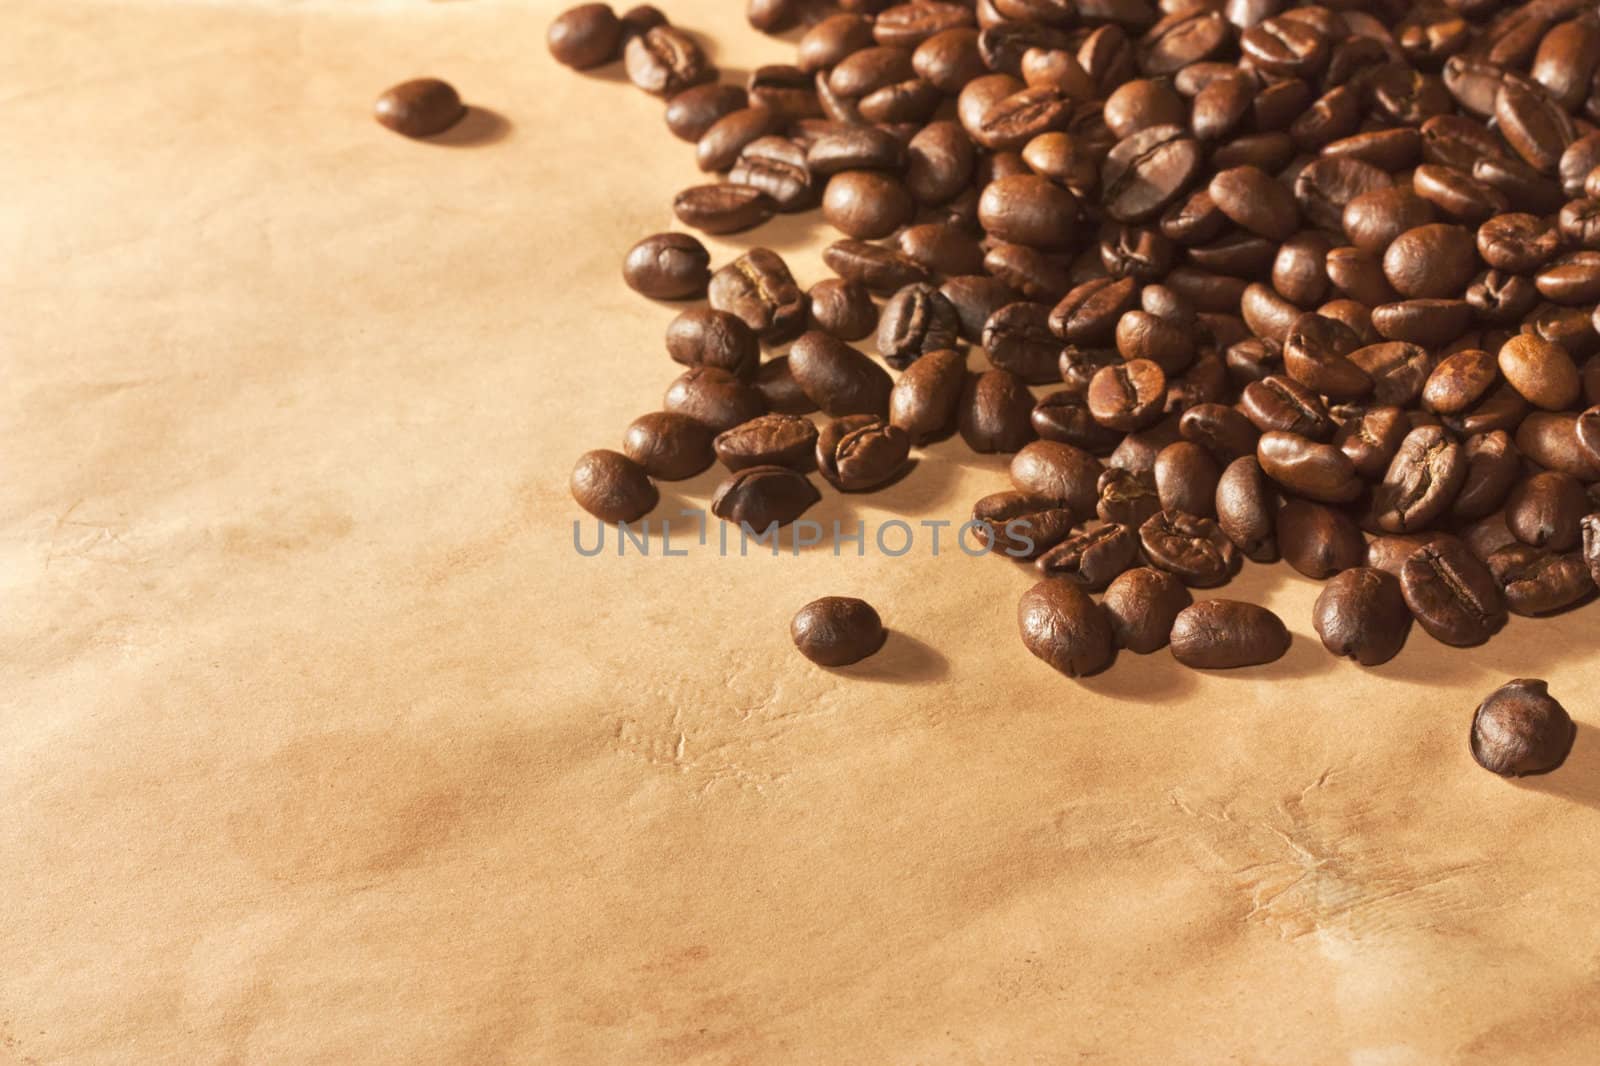 Pile of coffee beans on old paper